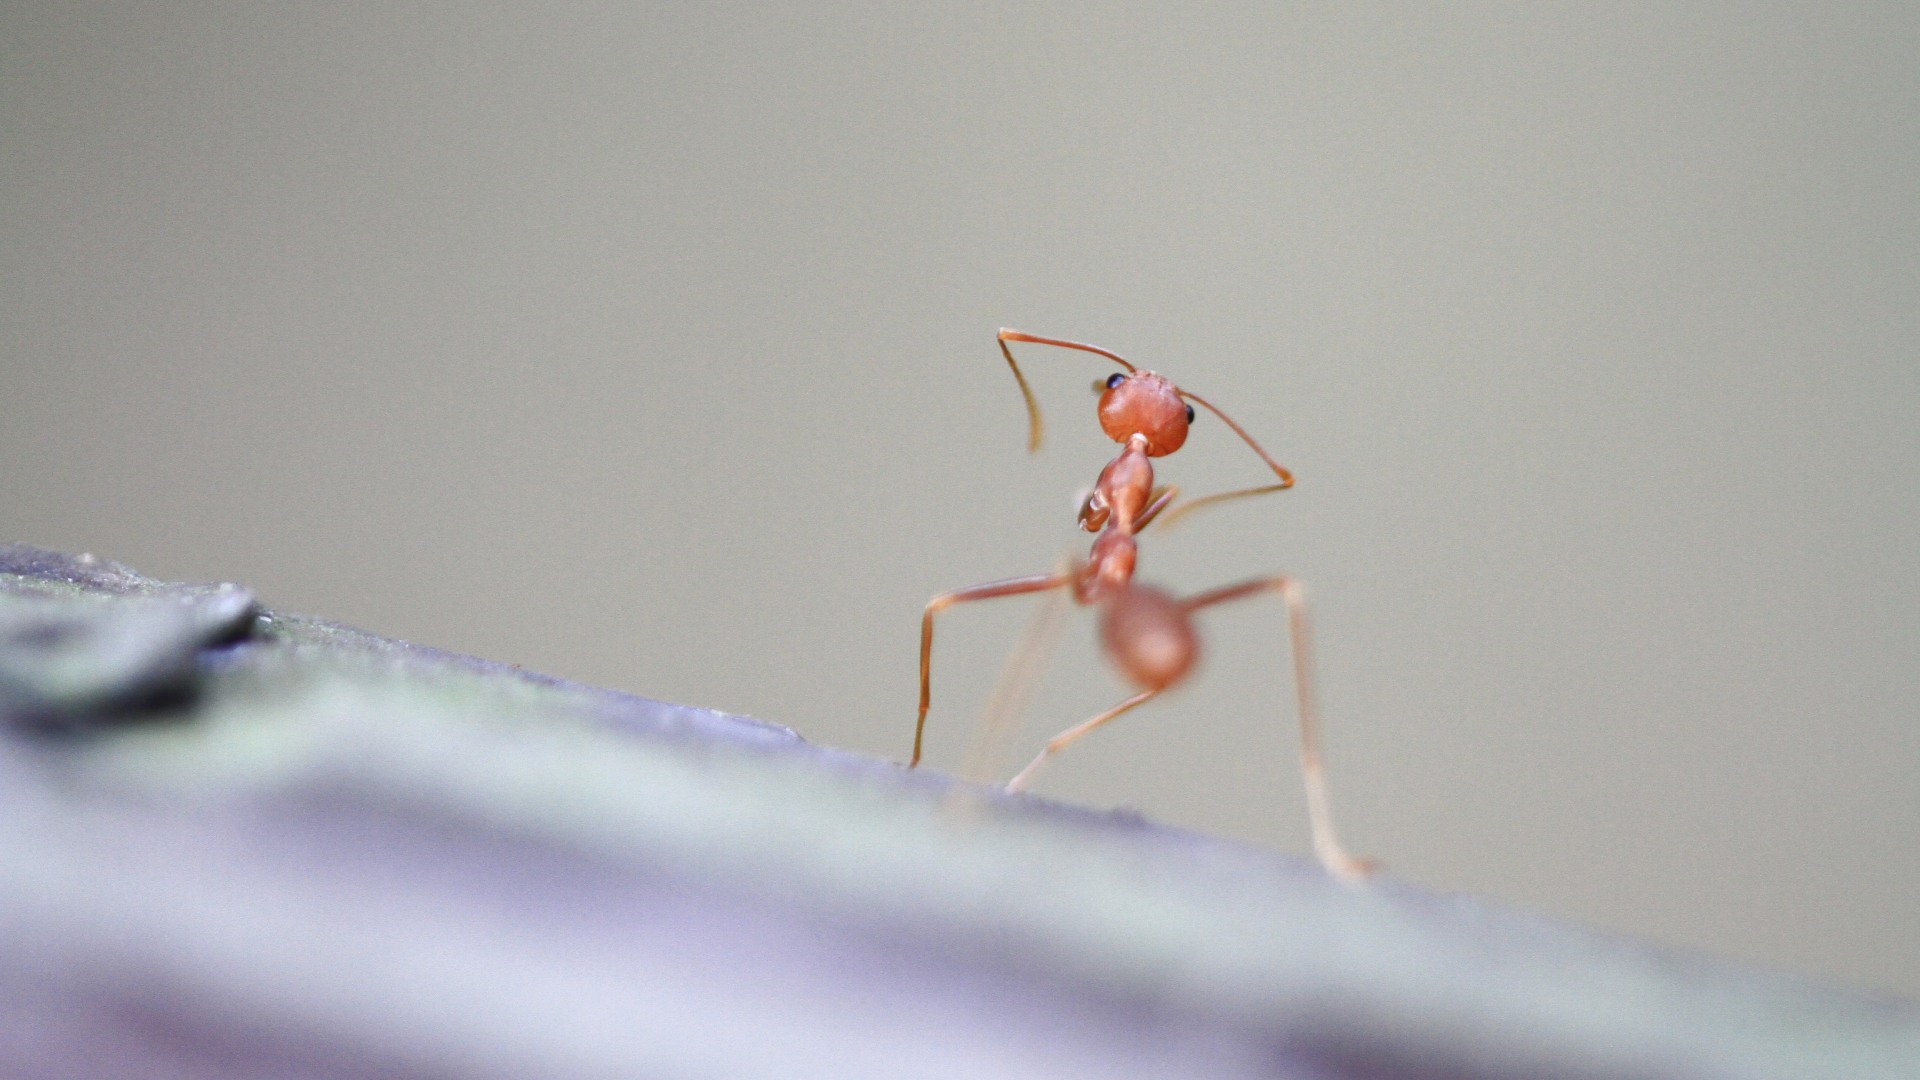 3 Things You Should Know Before Trying To Kill Fire Ants on Your Own